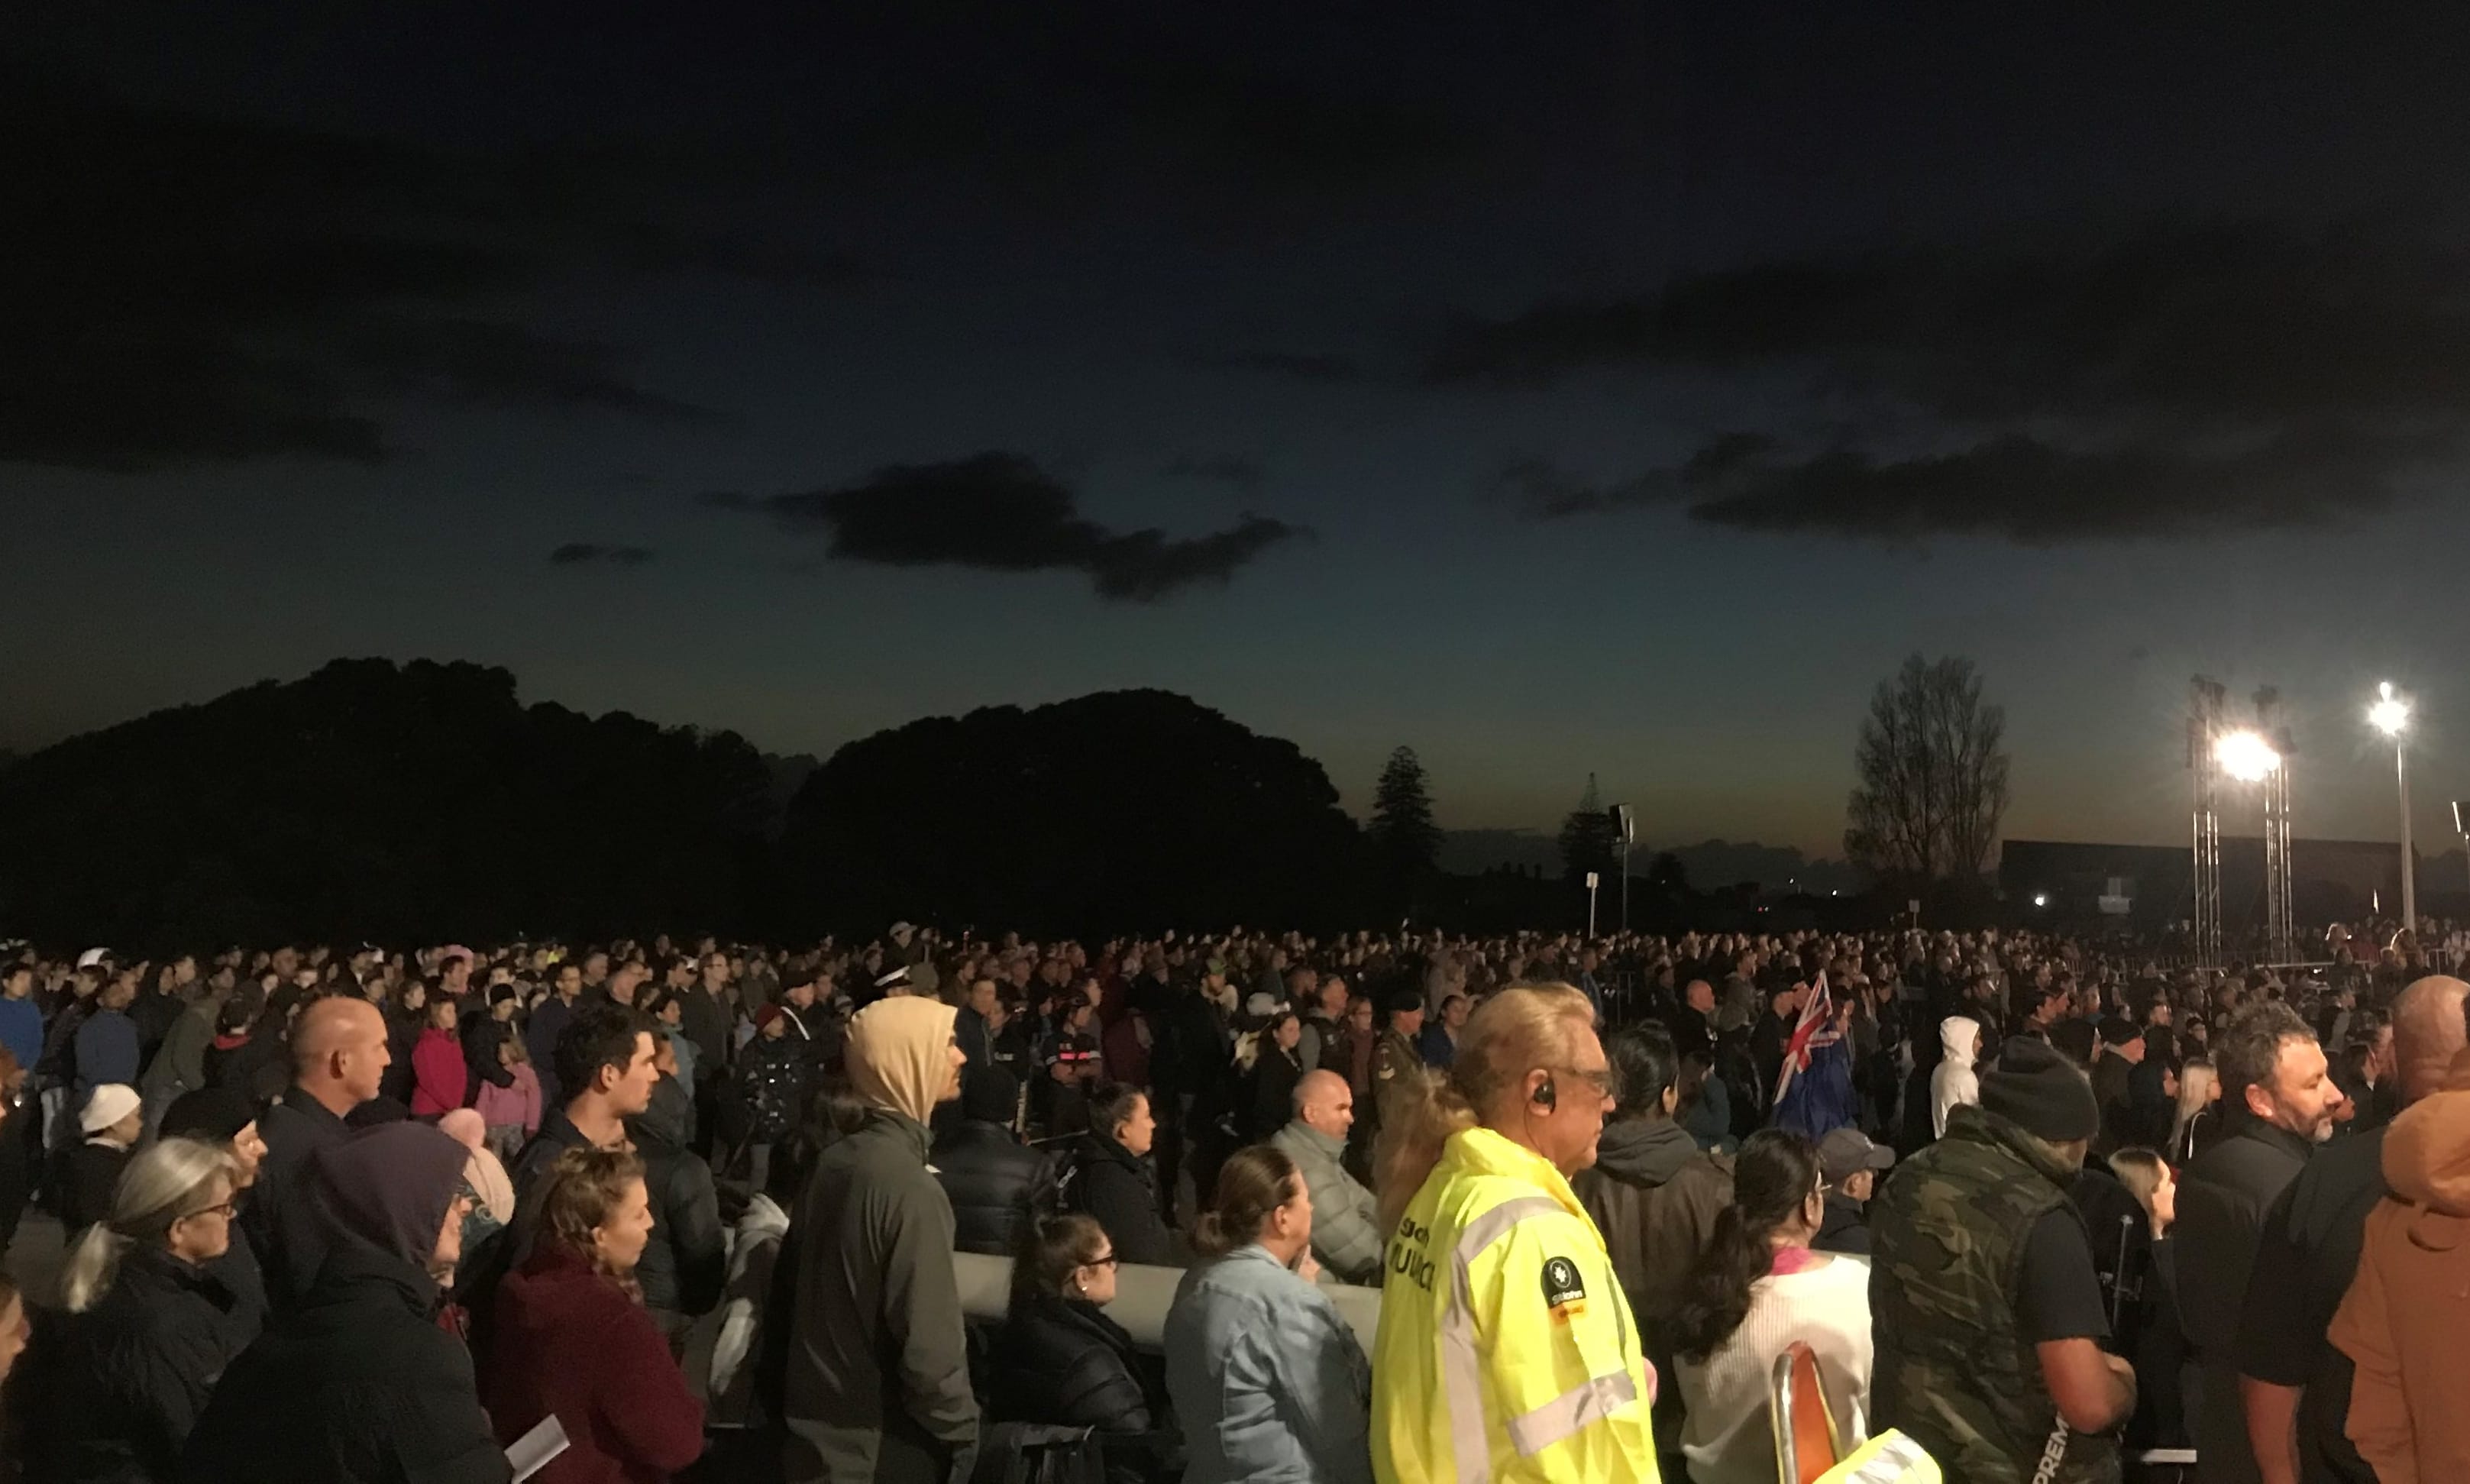 The sun rises during the dawn service in Auckland.